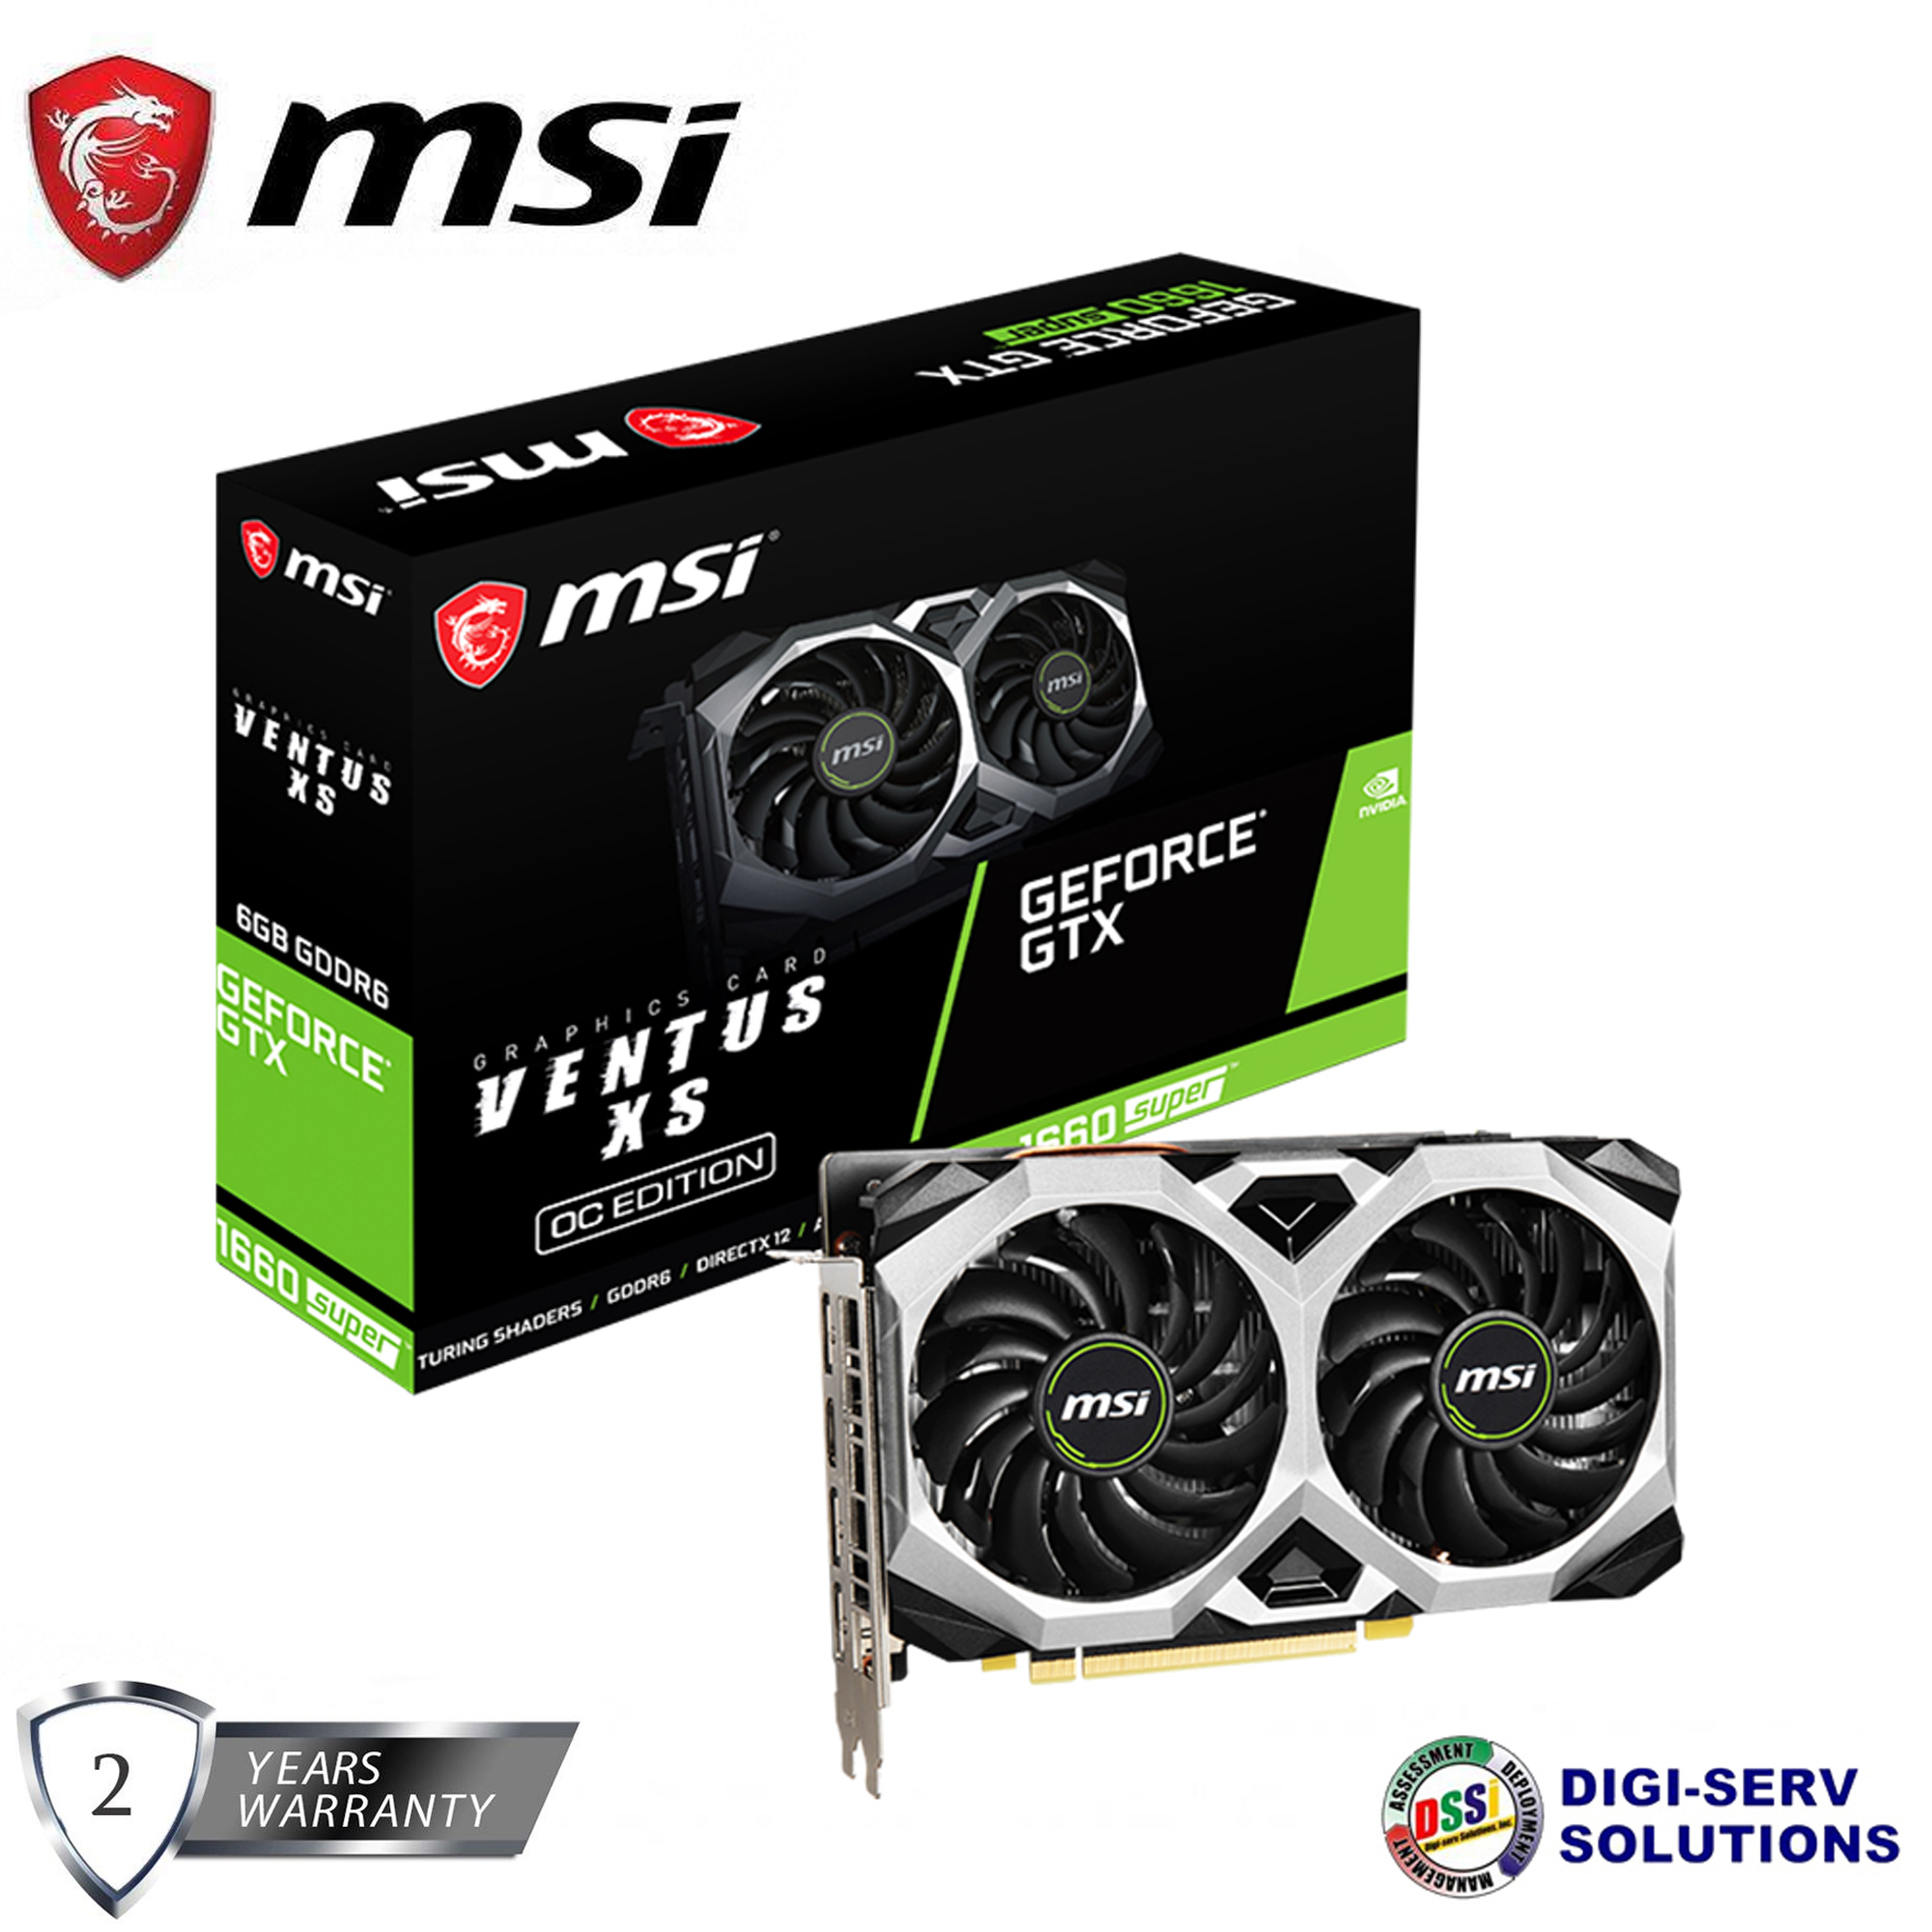 SALE!!! MSi GeForce GTX 1660 SUPER VENTUS XS OC 6GB Gaming Graphic Card with Dual Fan Design, TORX Fan Solid OC Performance, MSi Afterburner, VR Ready, and G-Sync